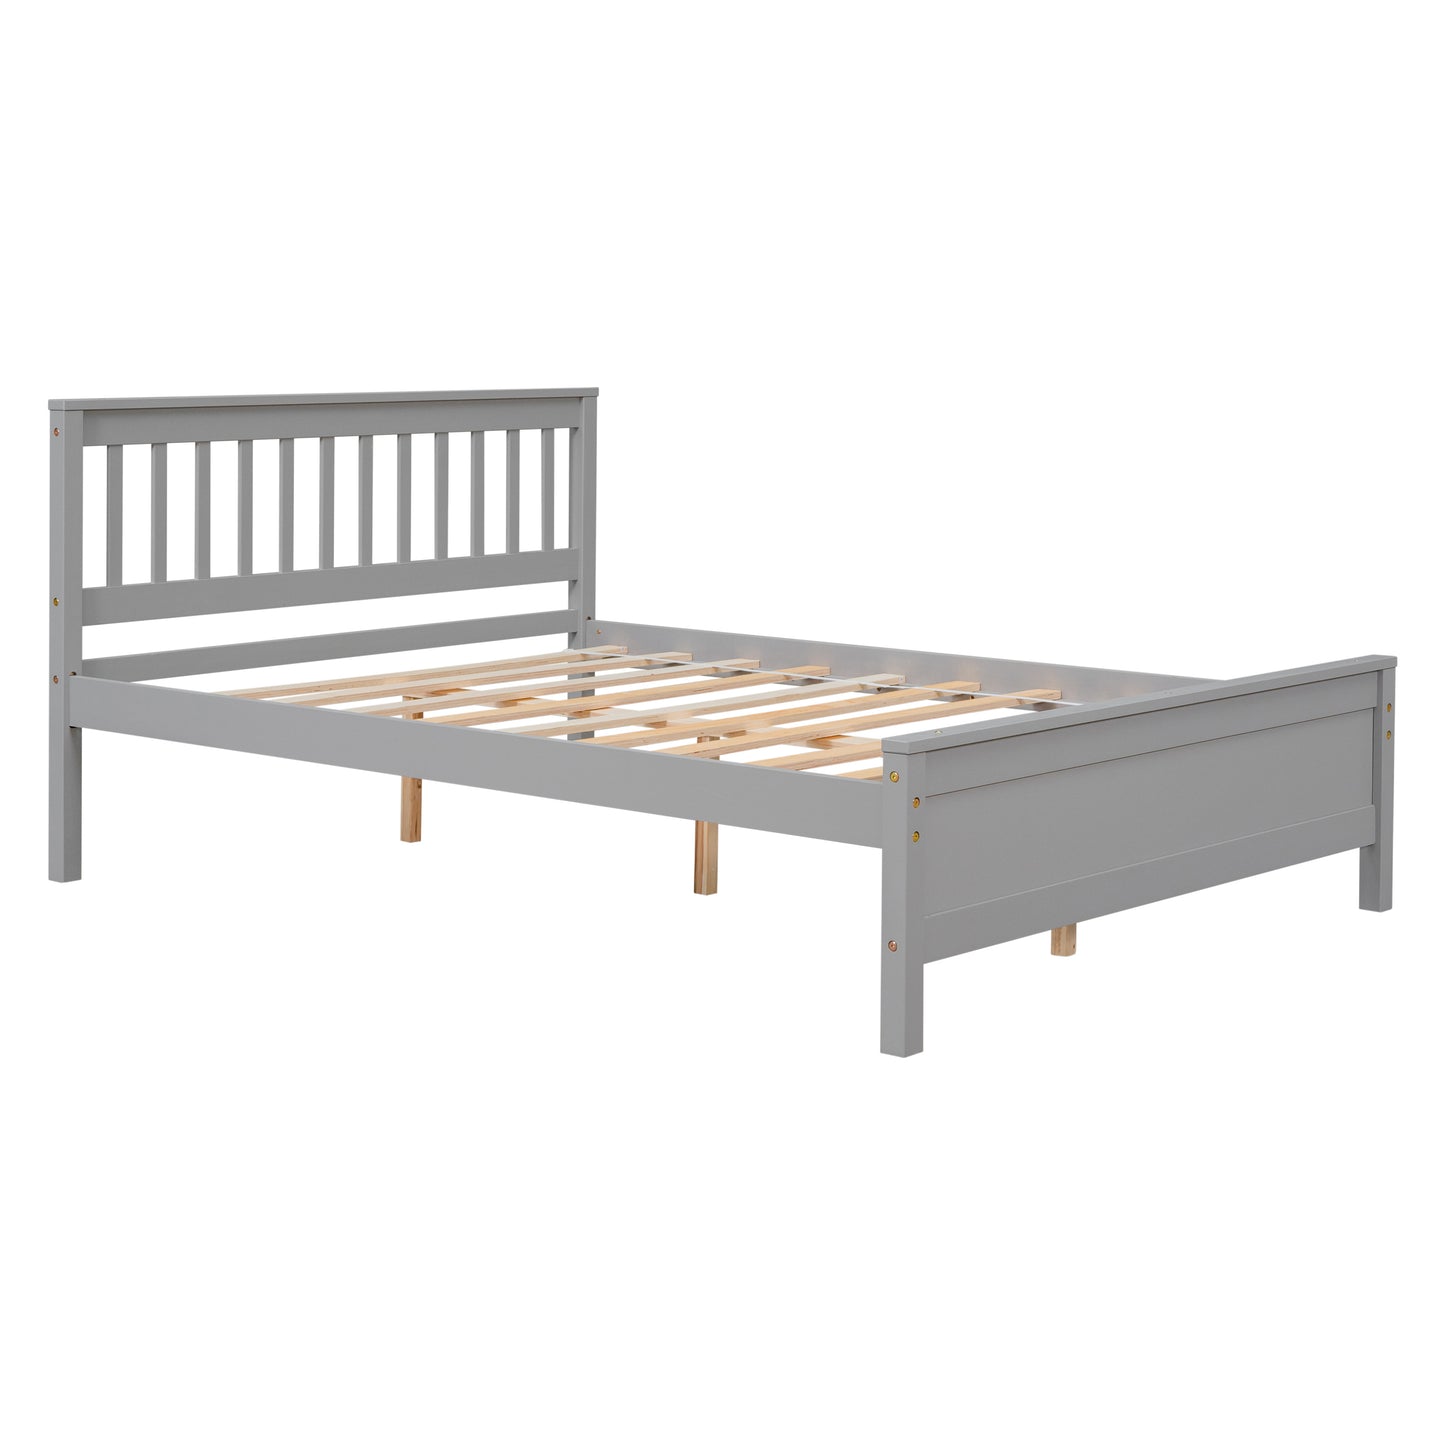 2 Piece Twin Size Platform Bed Frame Set with A Nightstand, Headboard and Footboard, Modern Wood Bedside Table with Drawer Storage, Gray